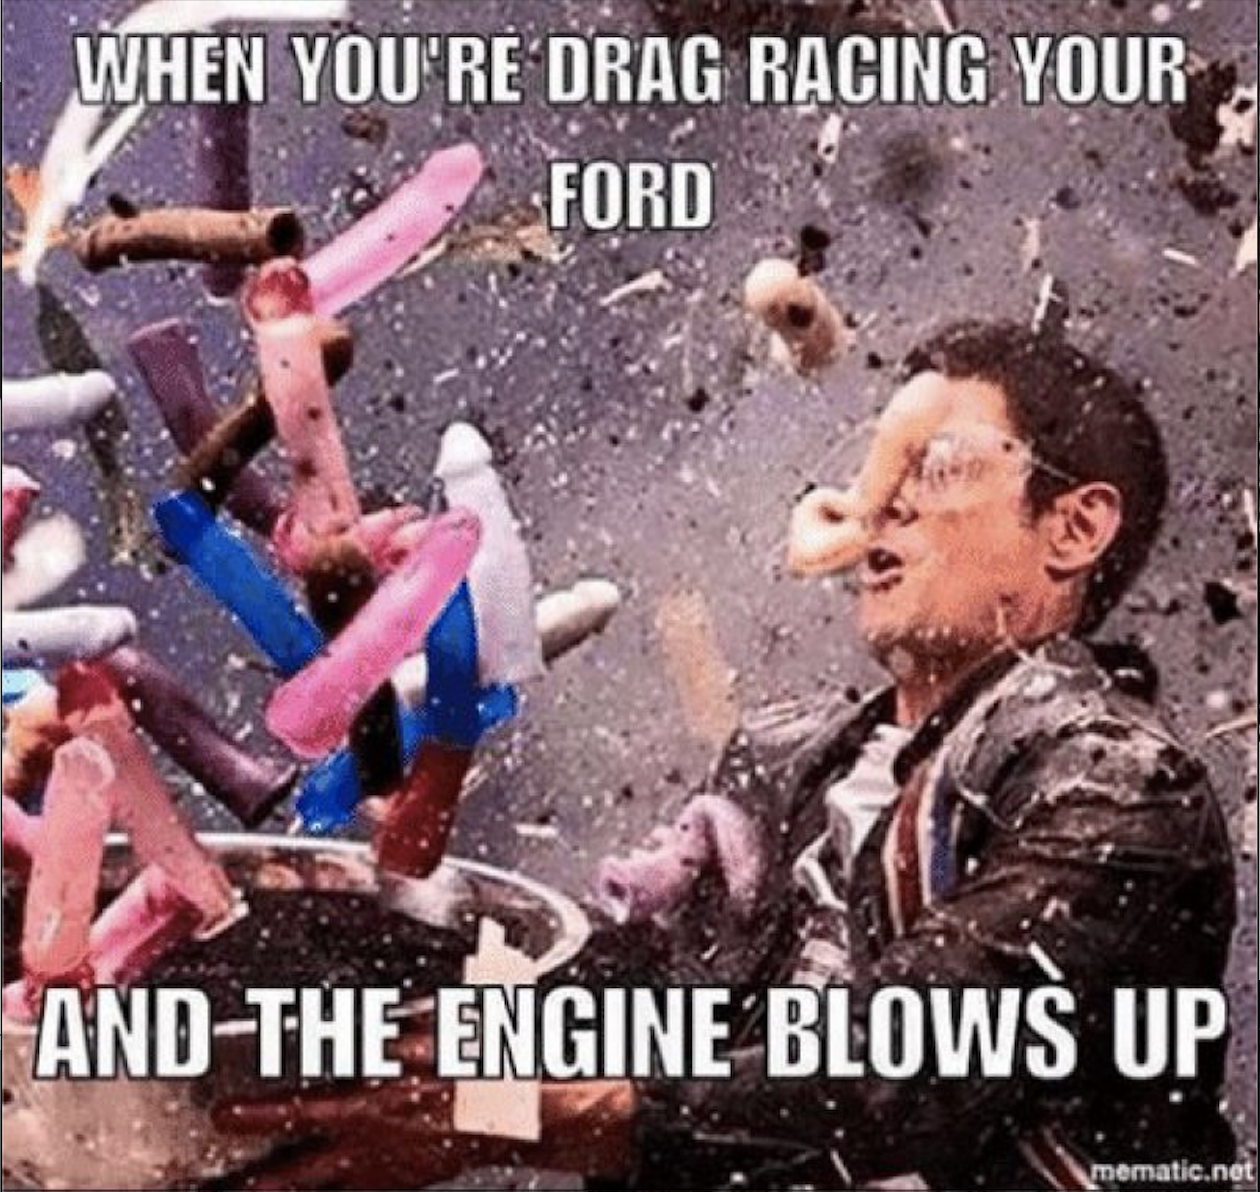 you re drag racing your ford - When You'Re Drag Racing Your Ford AndThe Engine Blows Up